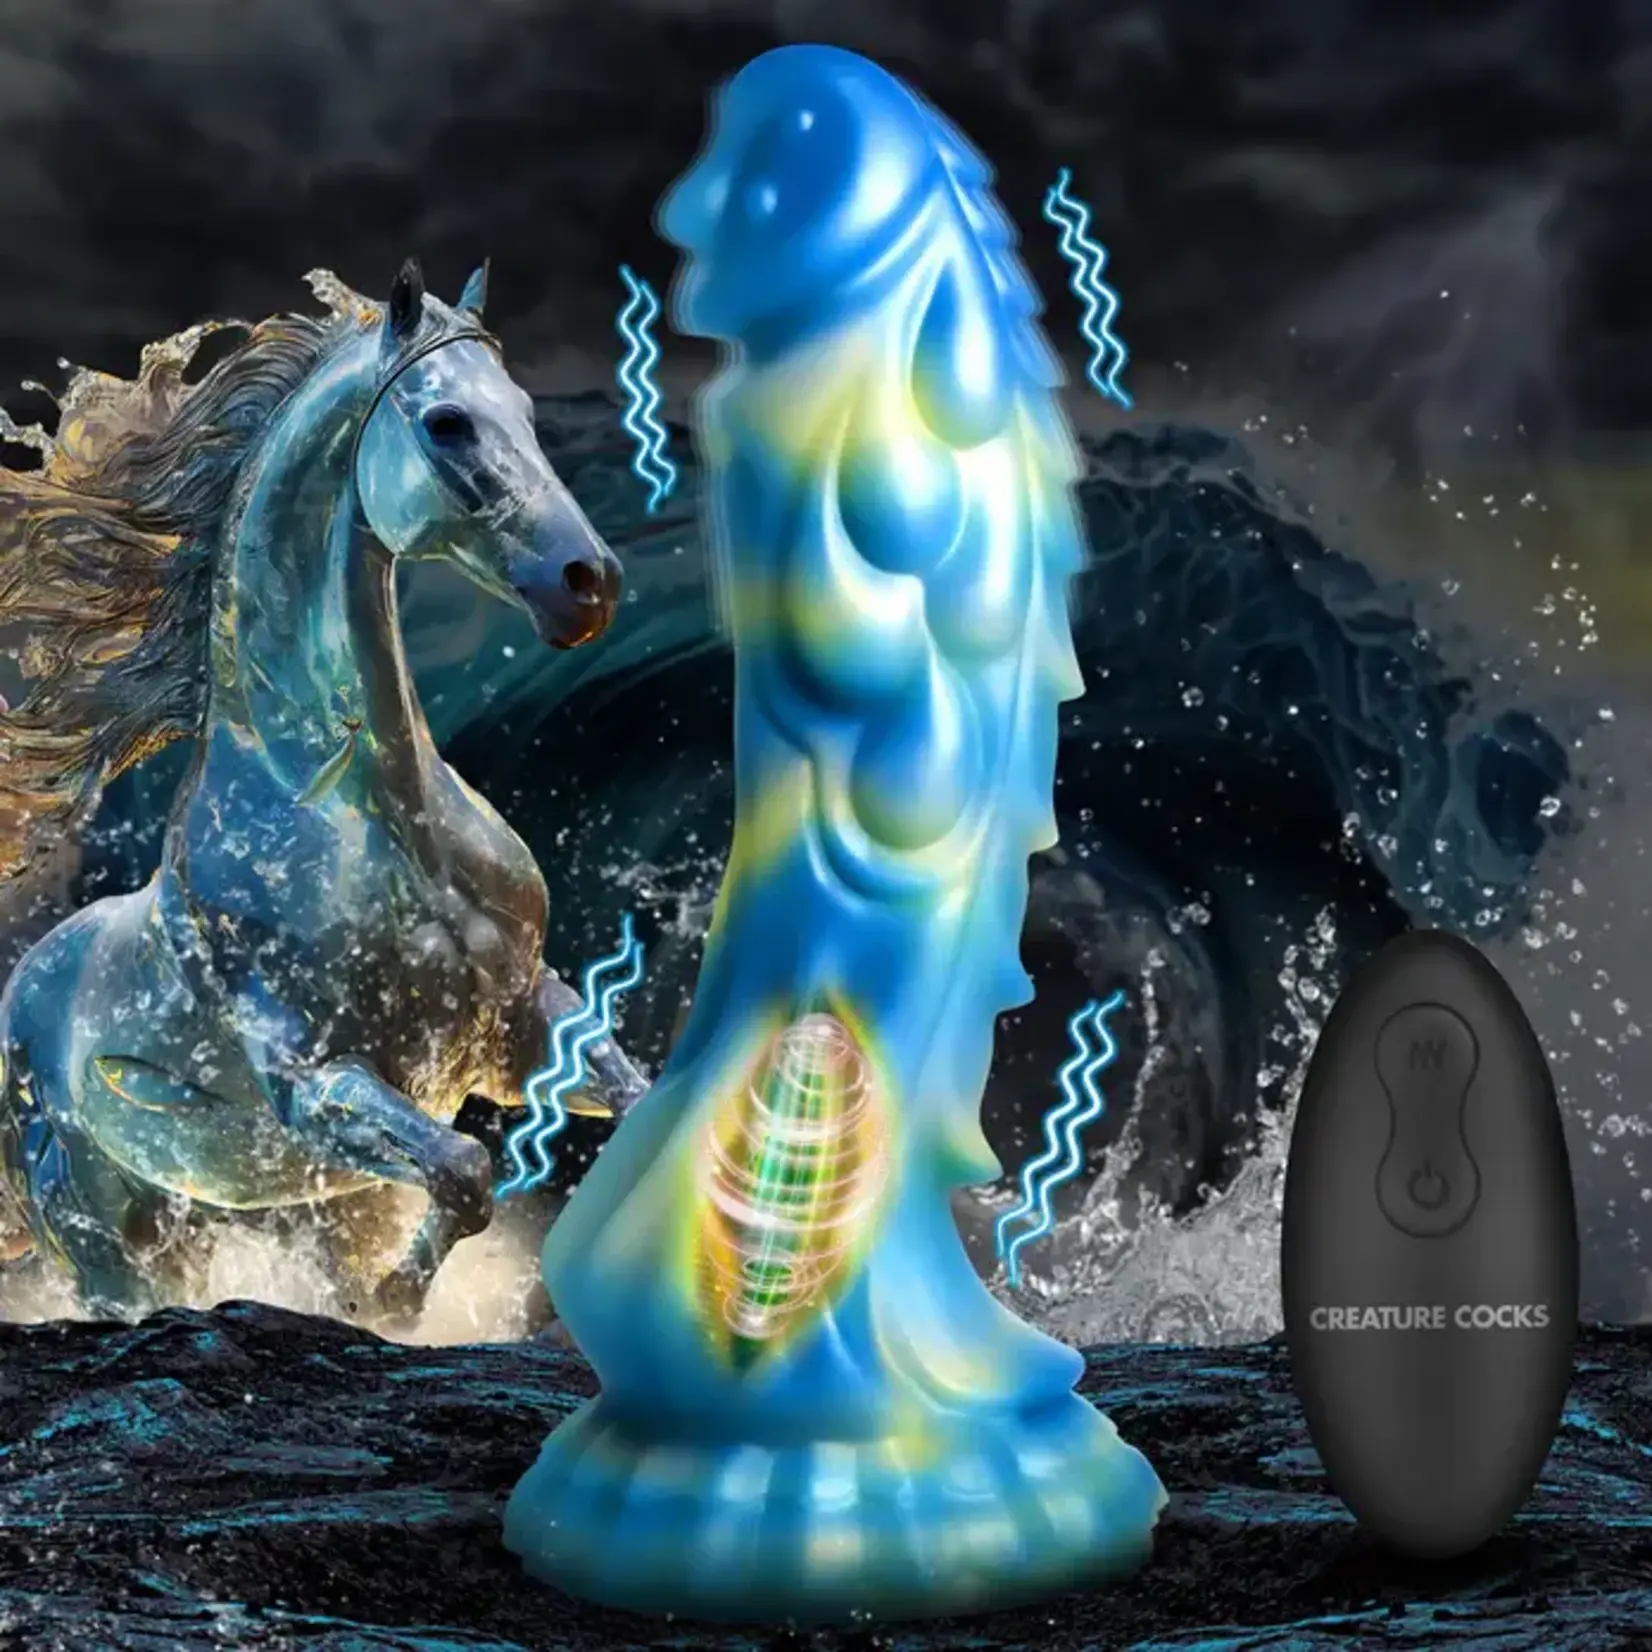 Creature Cocks Sea Stallion Silicone Rechargeable Dildo with Remote - Blue/Yellow